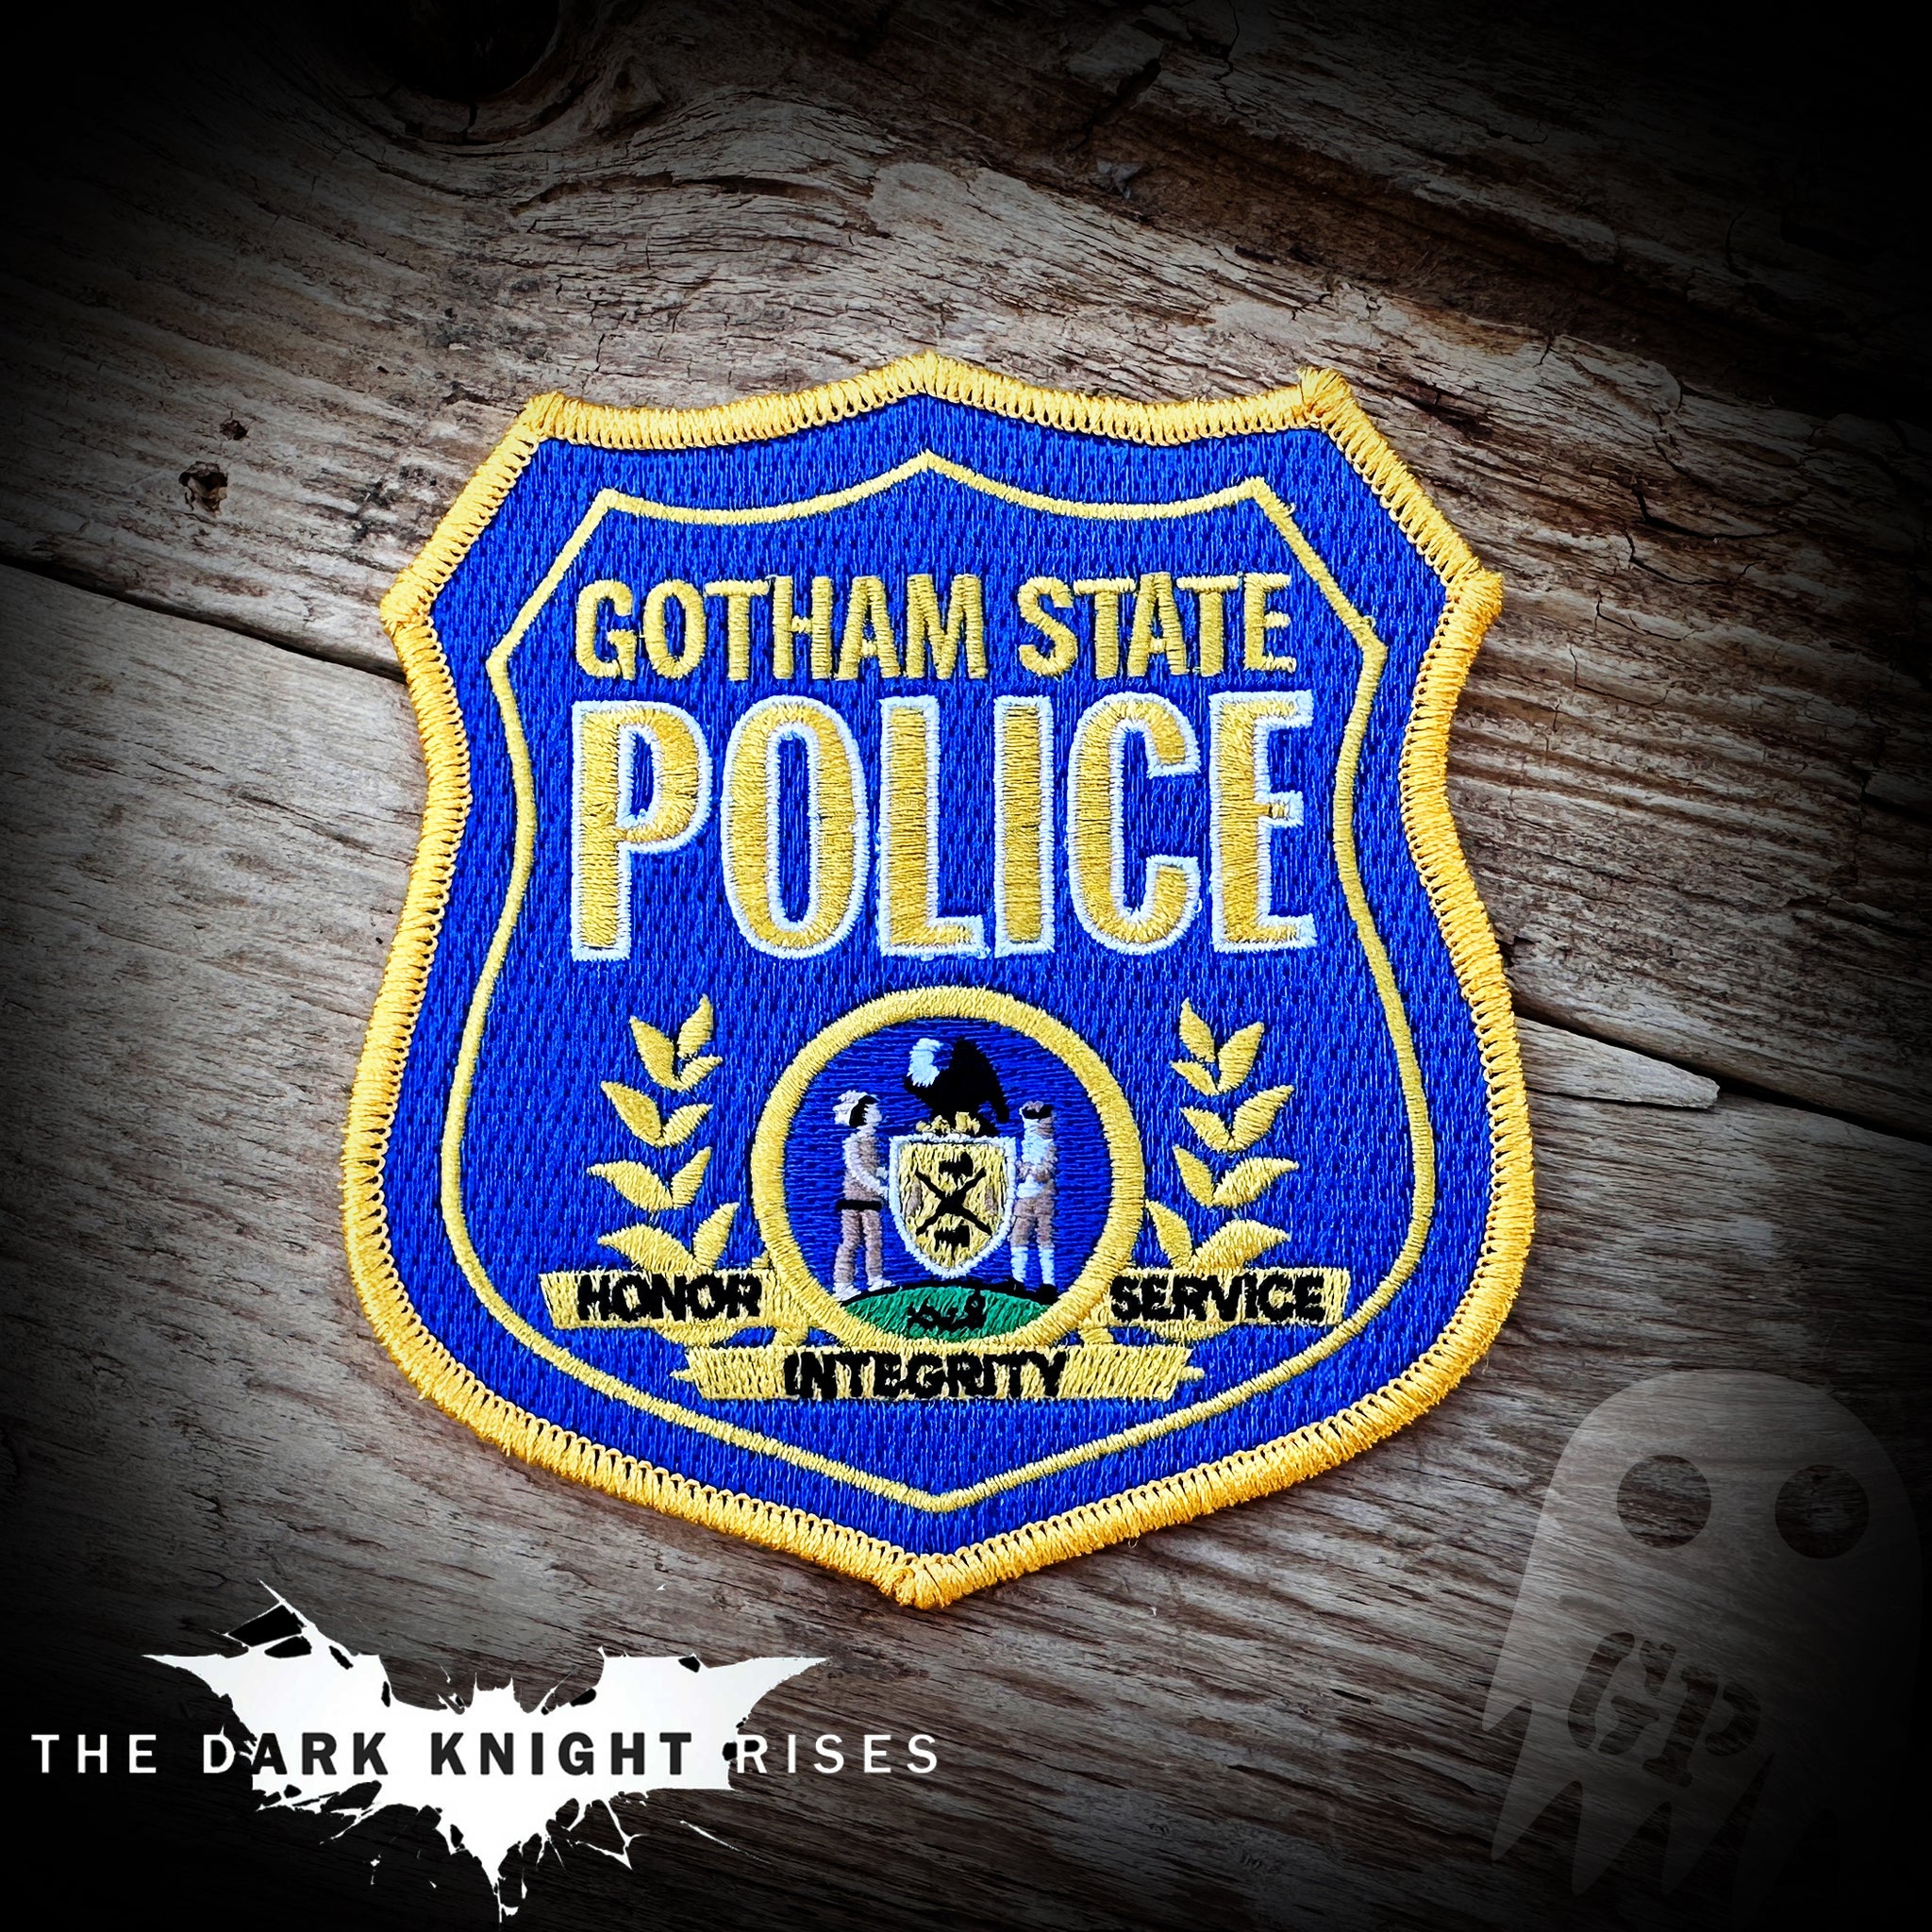 STATE POLICE #61 Gotham State Police patch - The Dark Knight Rises